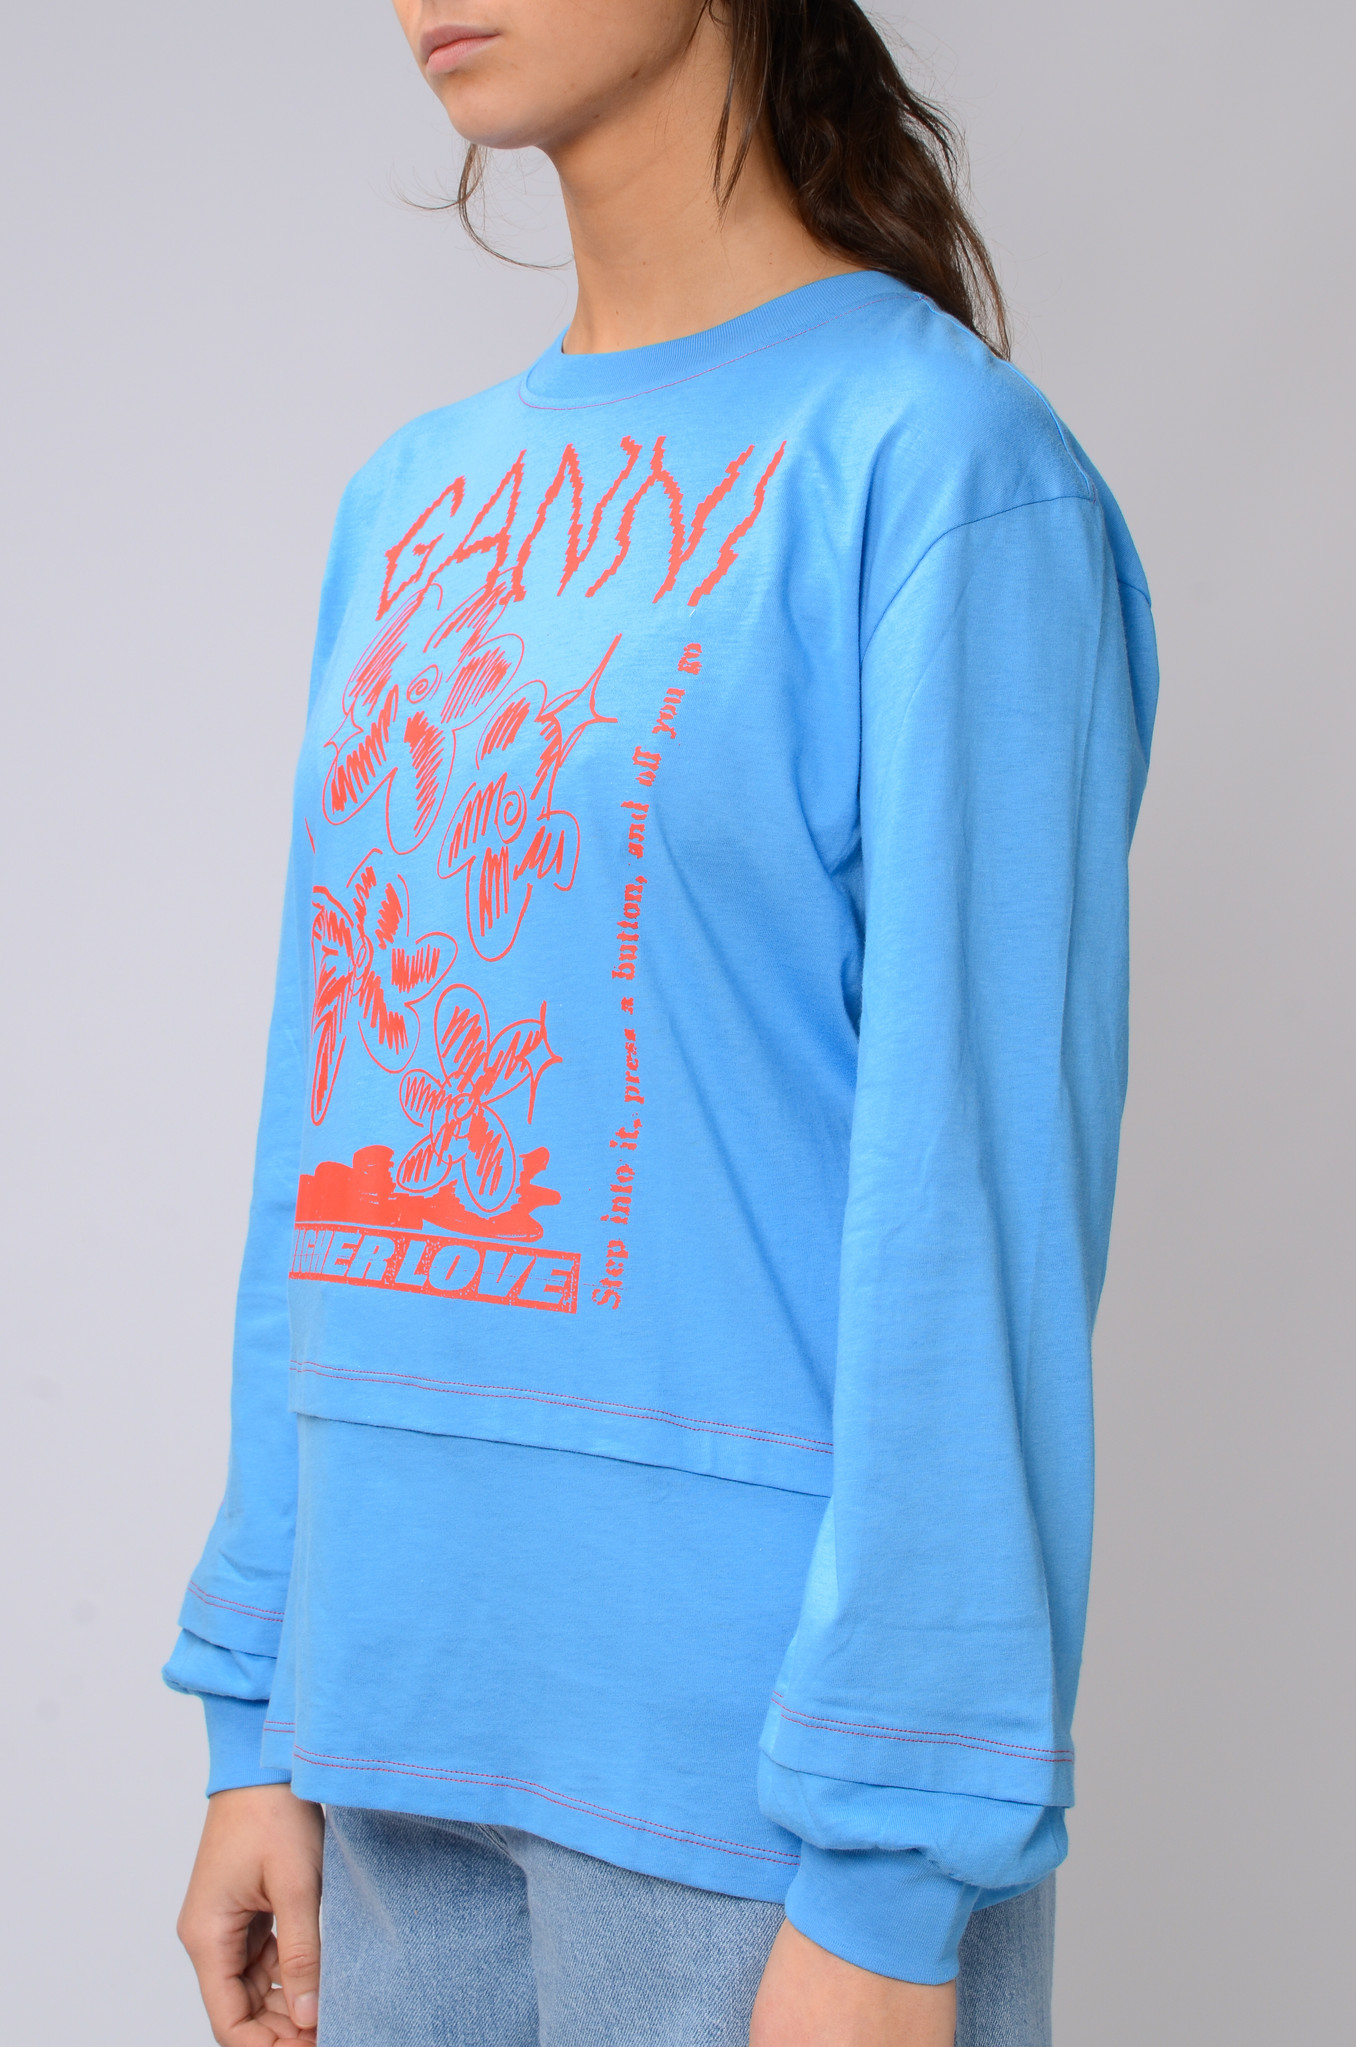 LONG SLEEVE GRAPHIC TEE IN AZURE BLUE-3